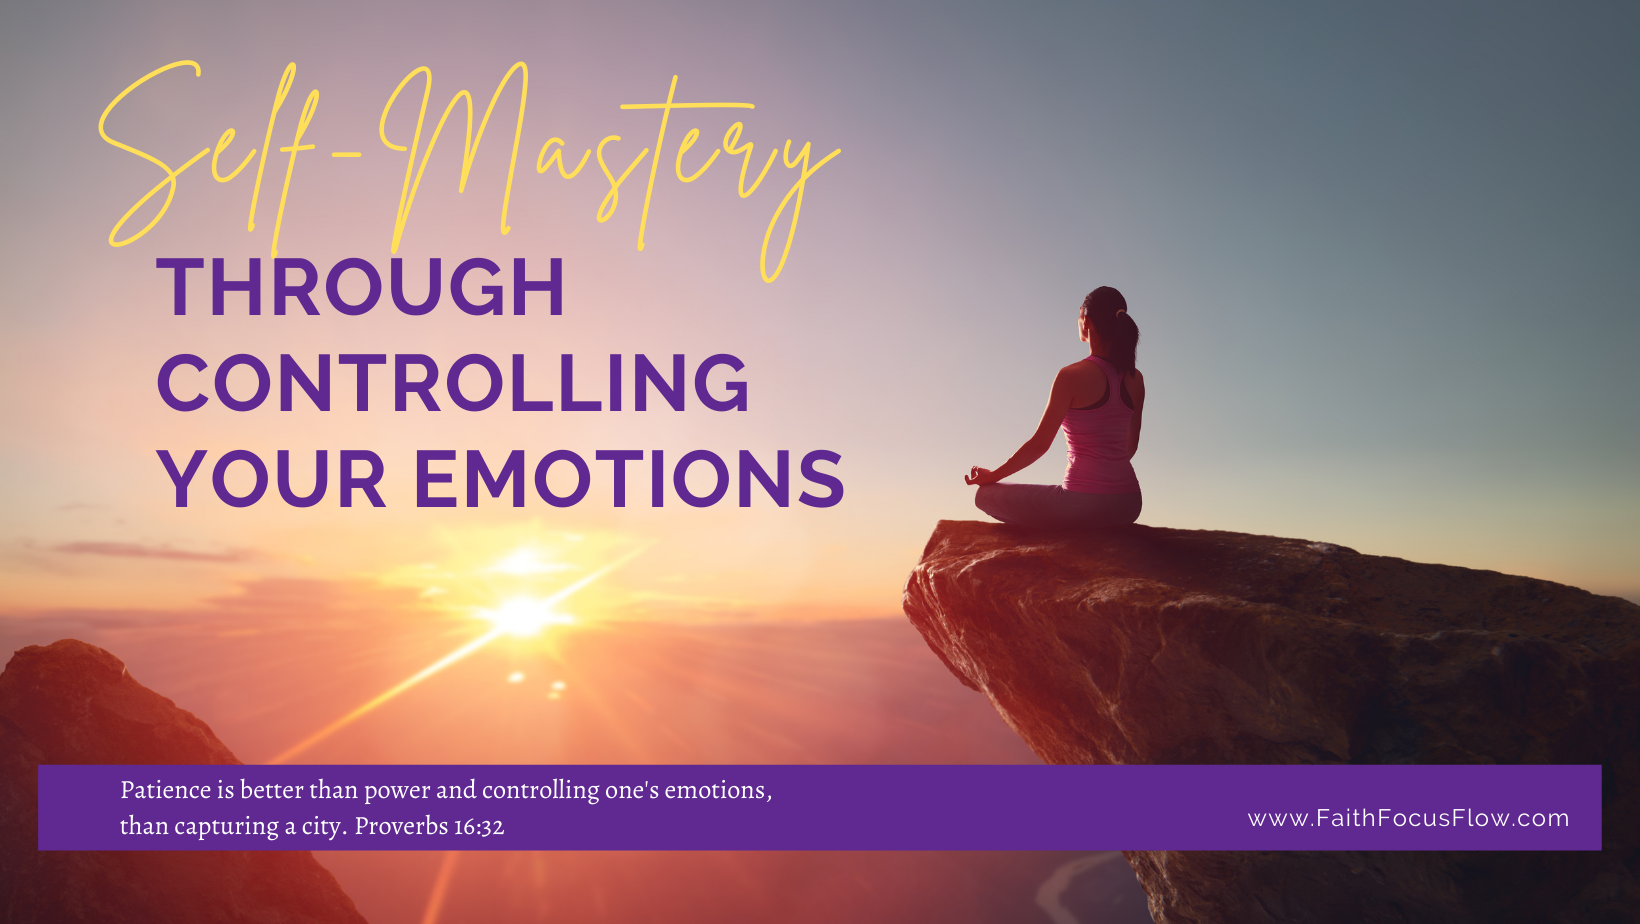 Self-mastery – through controlling your emotions | FaithFocusFlow®